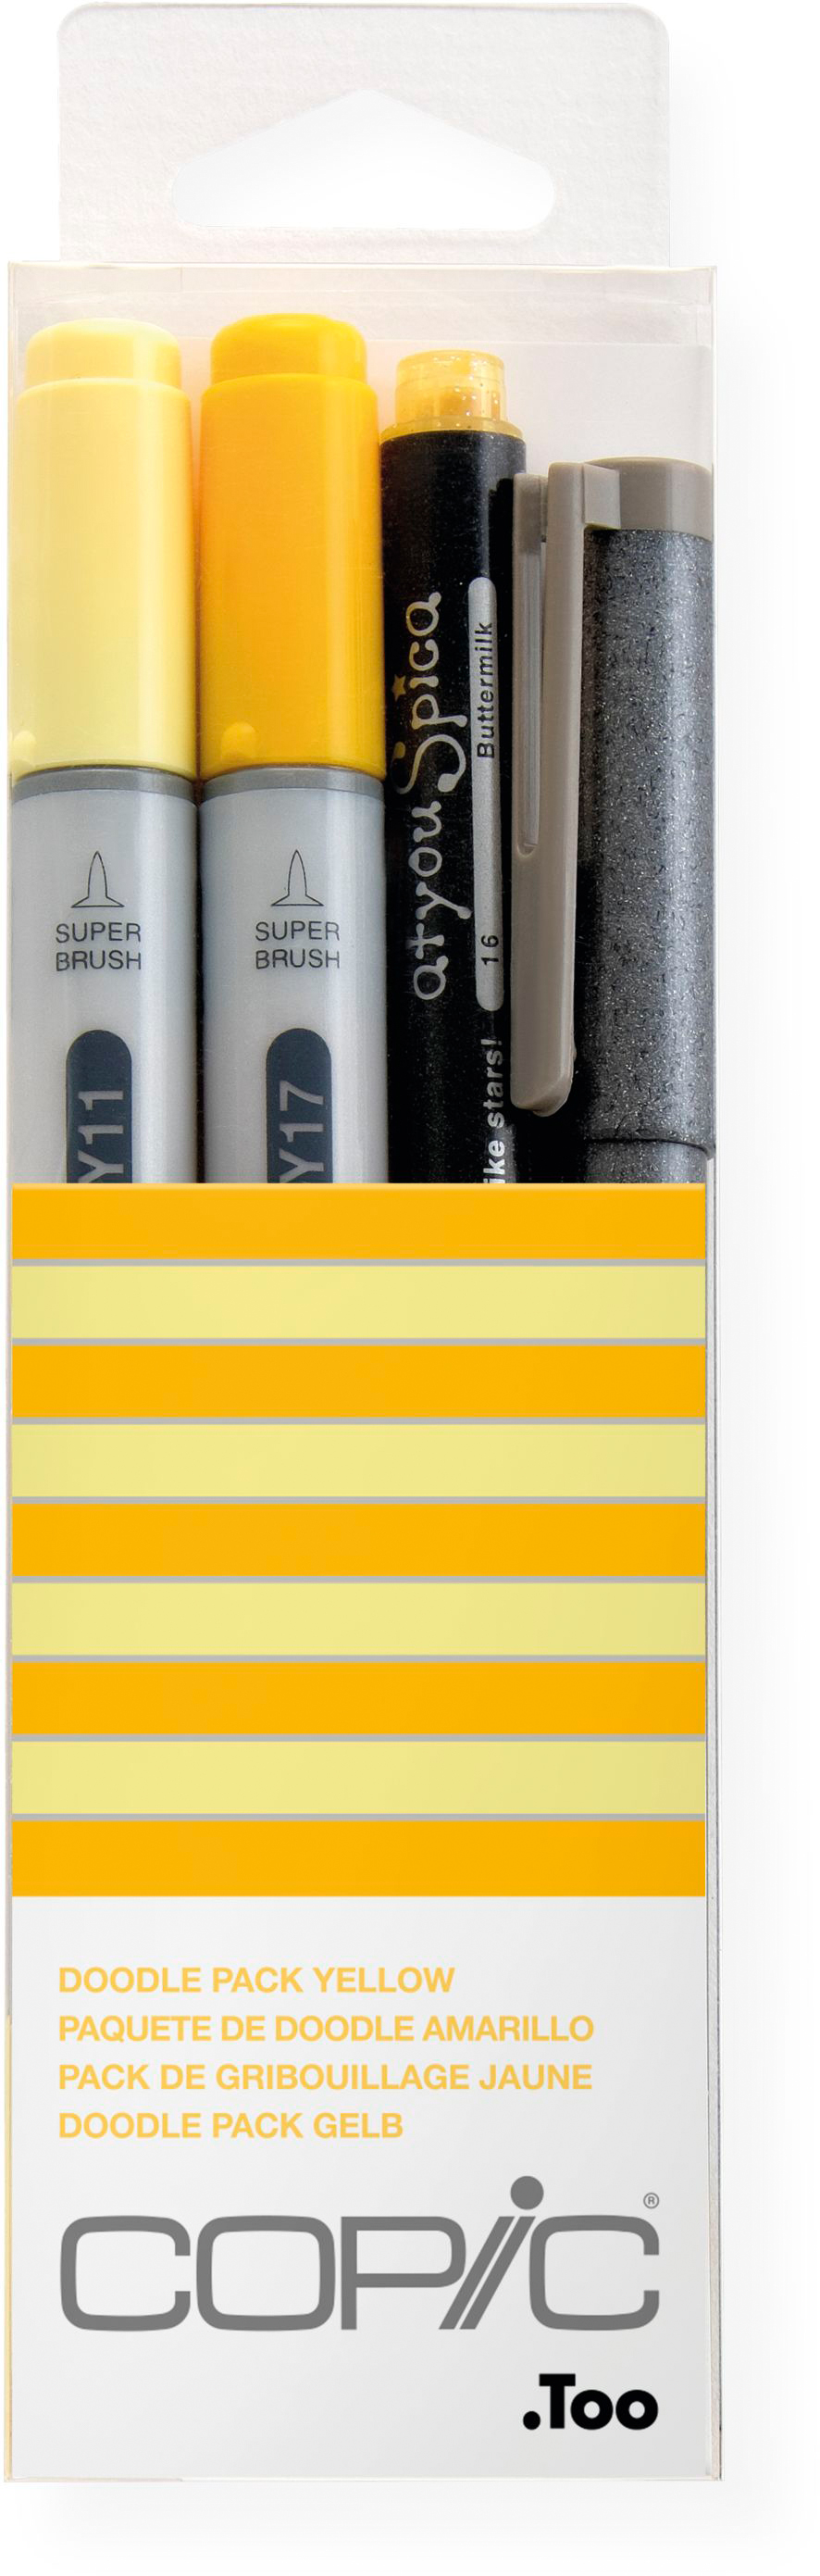 COPIC Marker Ciao 22075642 Doodle Pack Yellow, 4 pcs. Doodle Pack Yellow, 4 pcs.